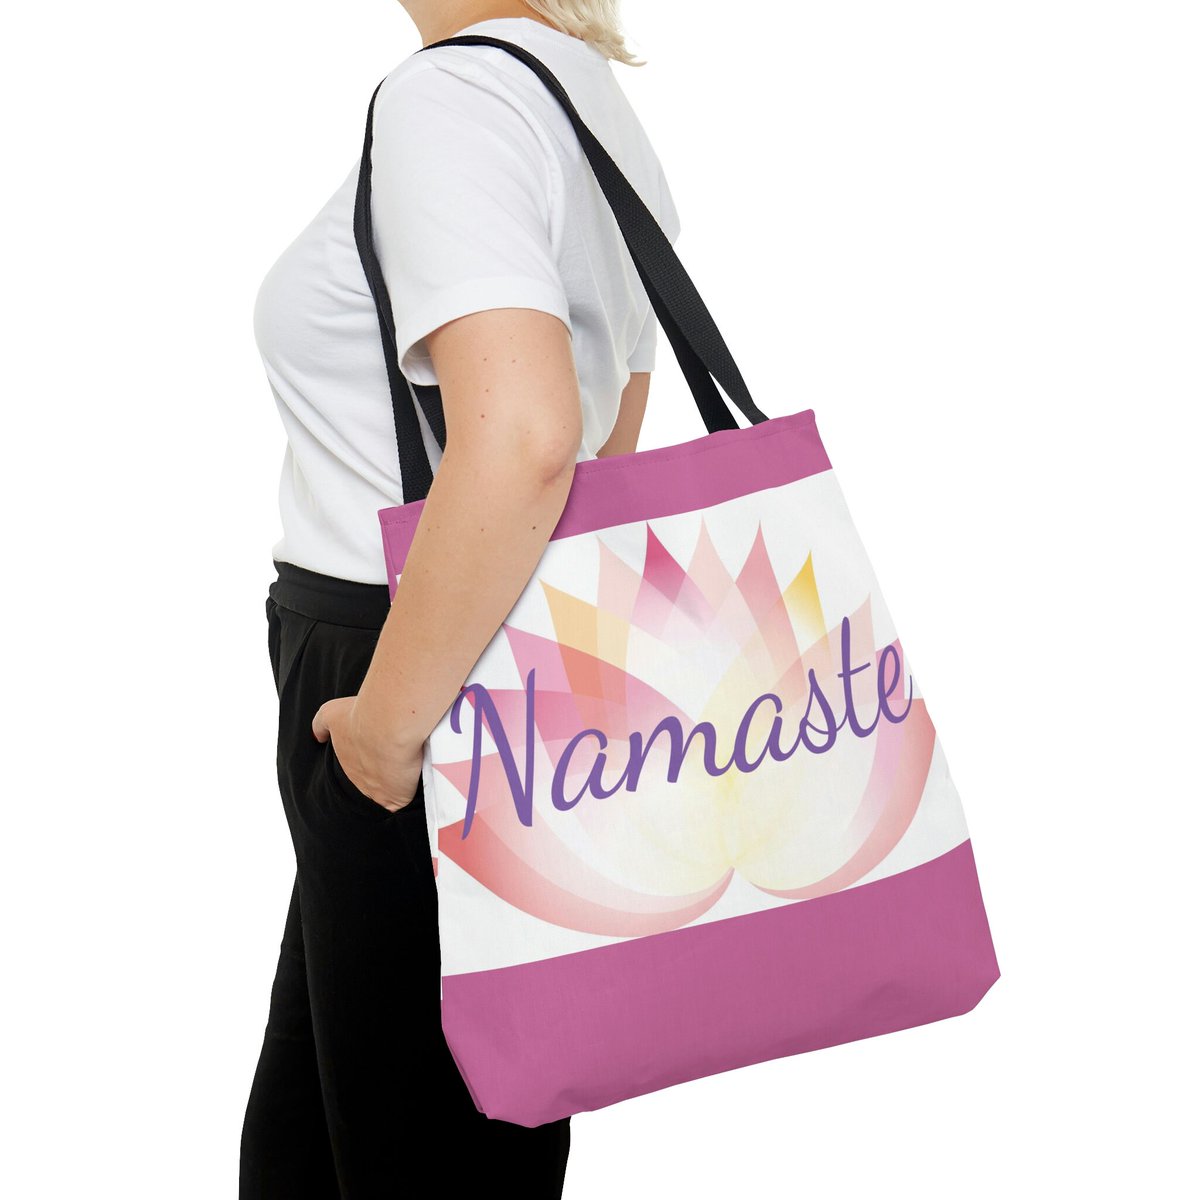 Excited to share the latest addition to my #etsy shop: All purpose Namaste Totebag Pattern, totebag, namaste, yoga totebag, Lotus Flower totebag etsy.me/3oIWaka #totebagpattern #totebag #pinktotebag #namastetotebag #patternbag #yogatotebag #carryingtotebag #gif